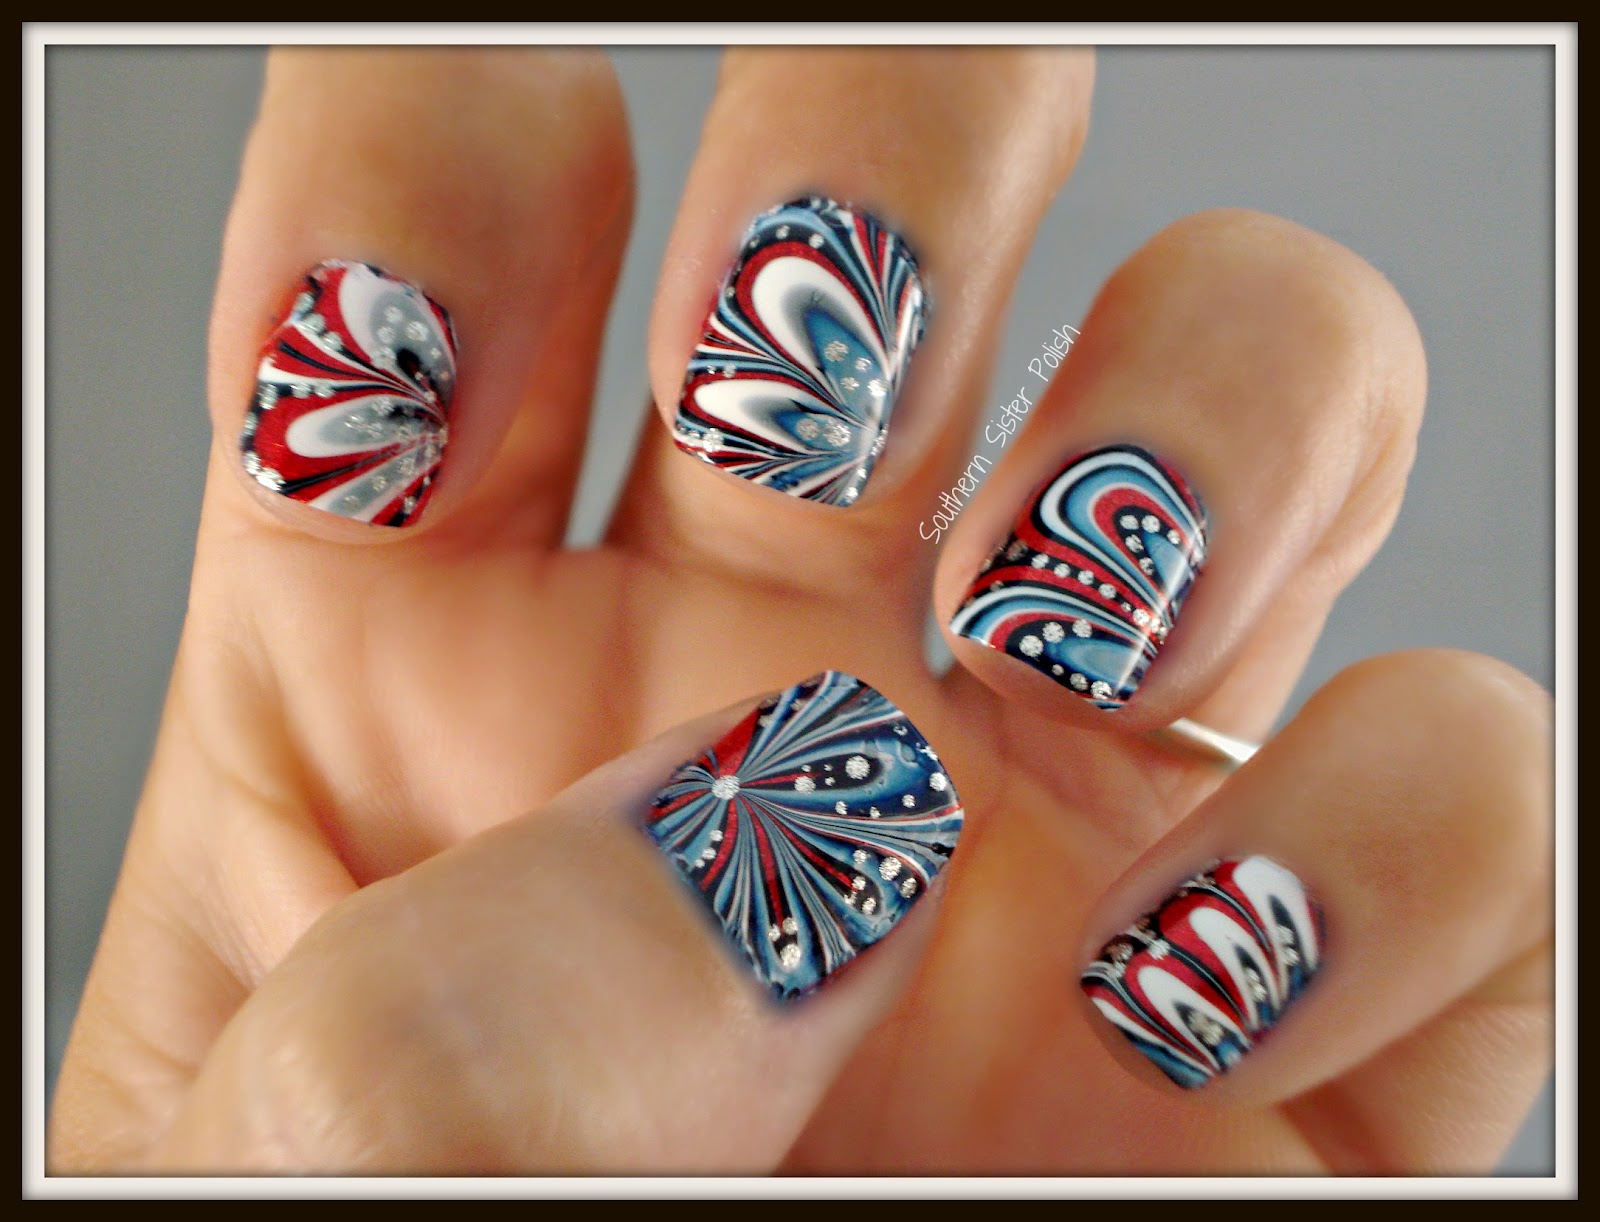 4. July 4th Nail Art Inspiration from Gabby - wide 7